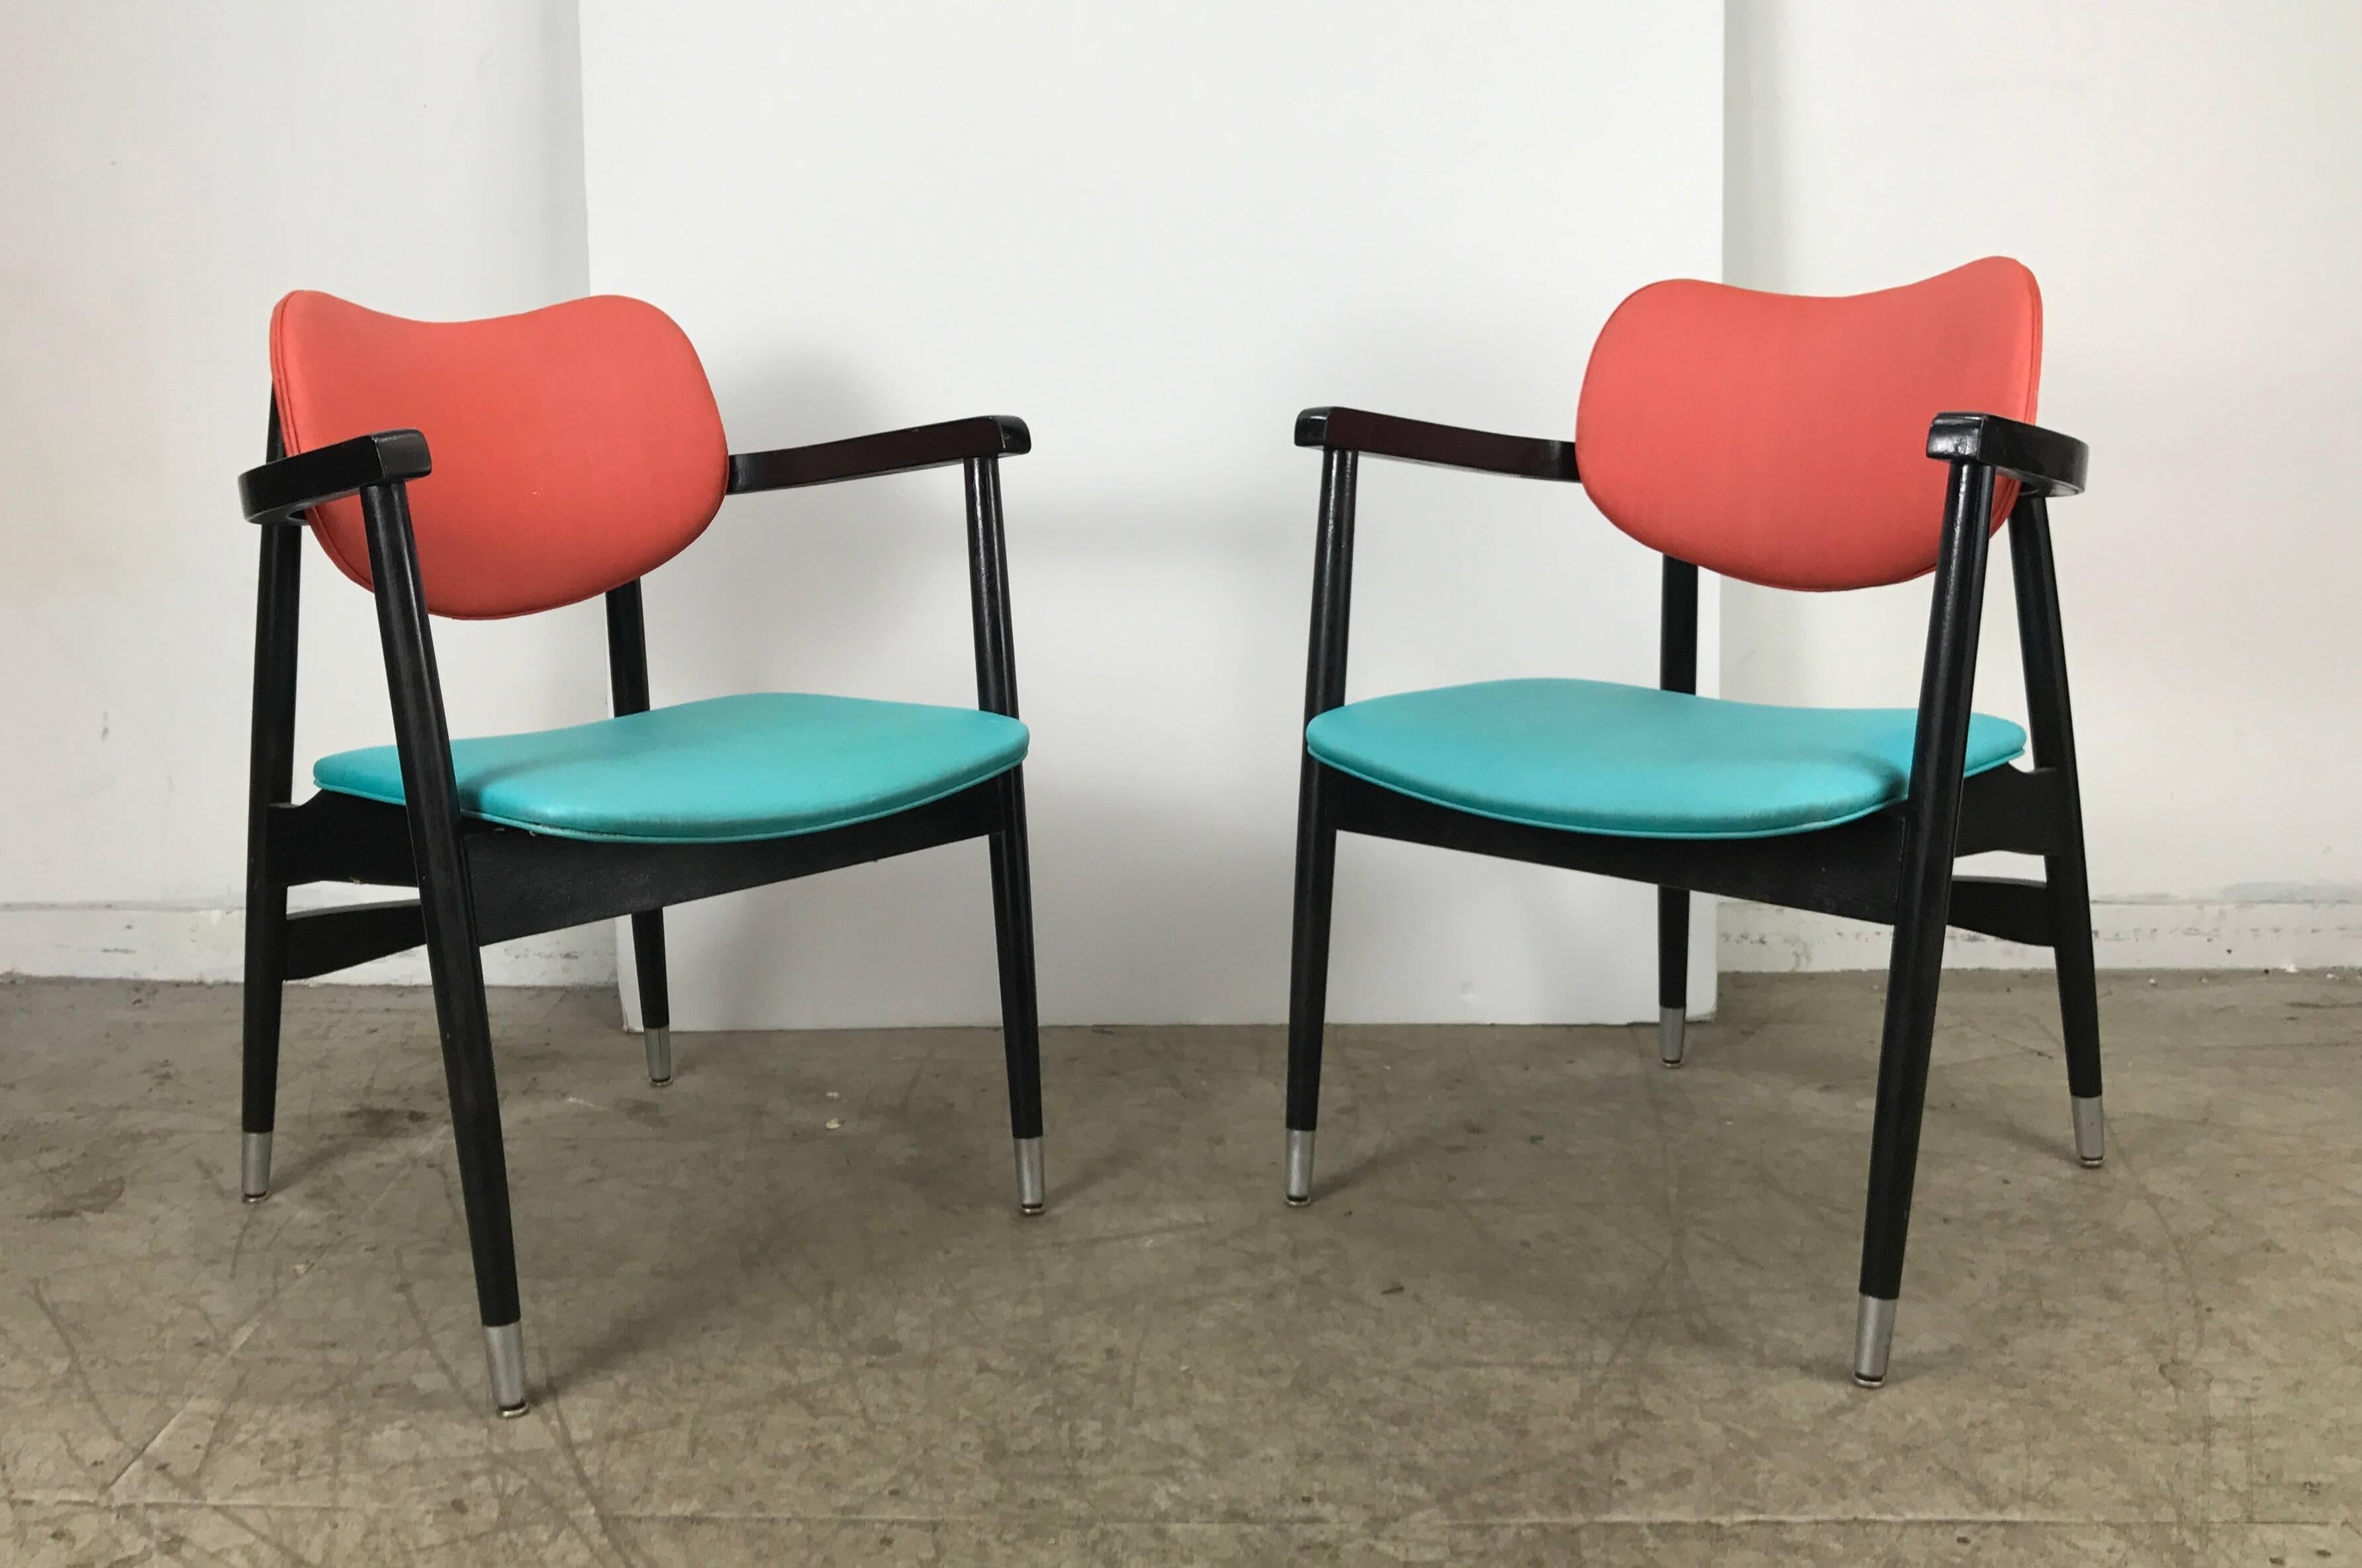 Pair of armchairs by Shelby Williams. Retain original turquoise and orange vinyl seat and back, black lacquer frame. Timeless classic design.